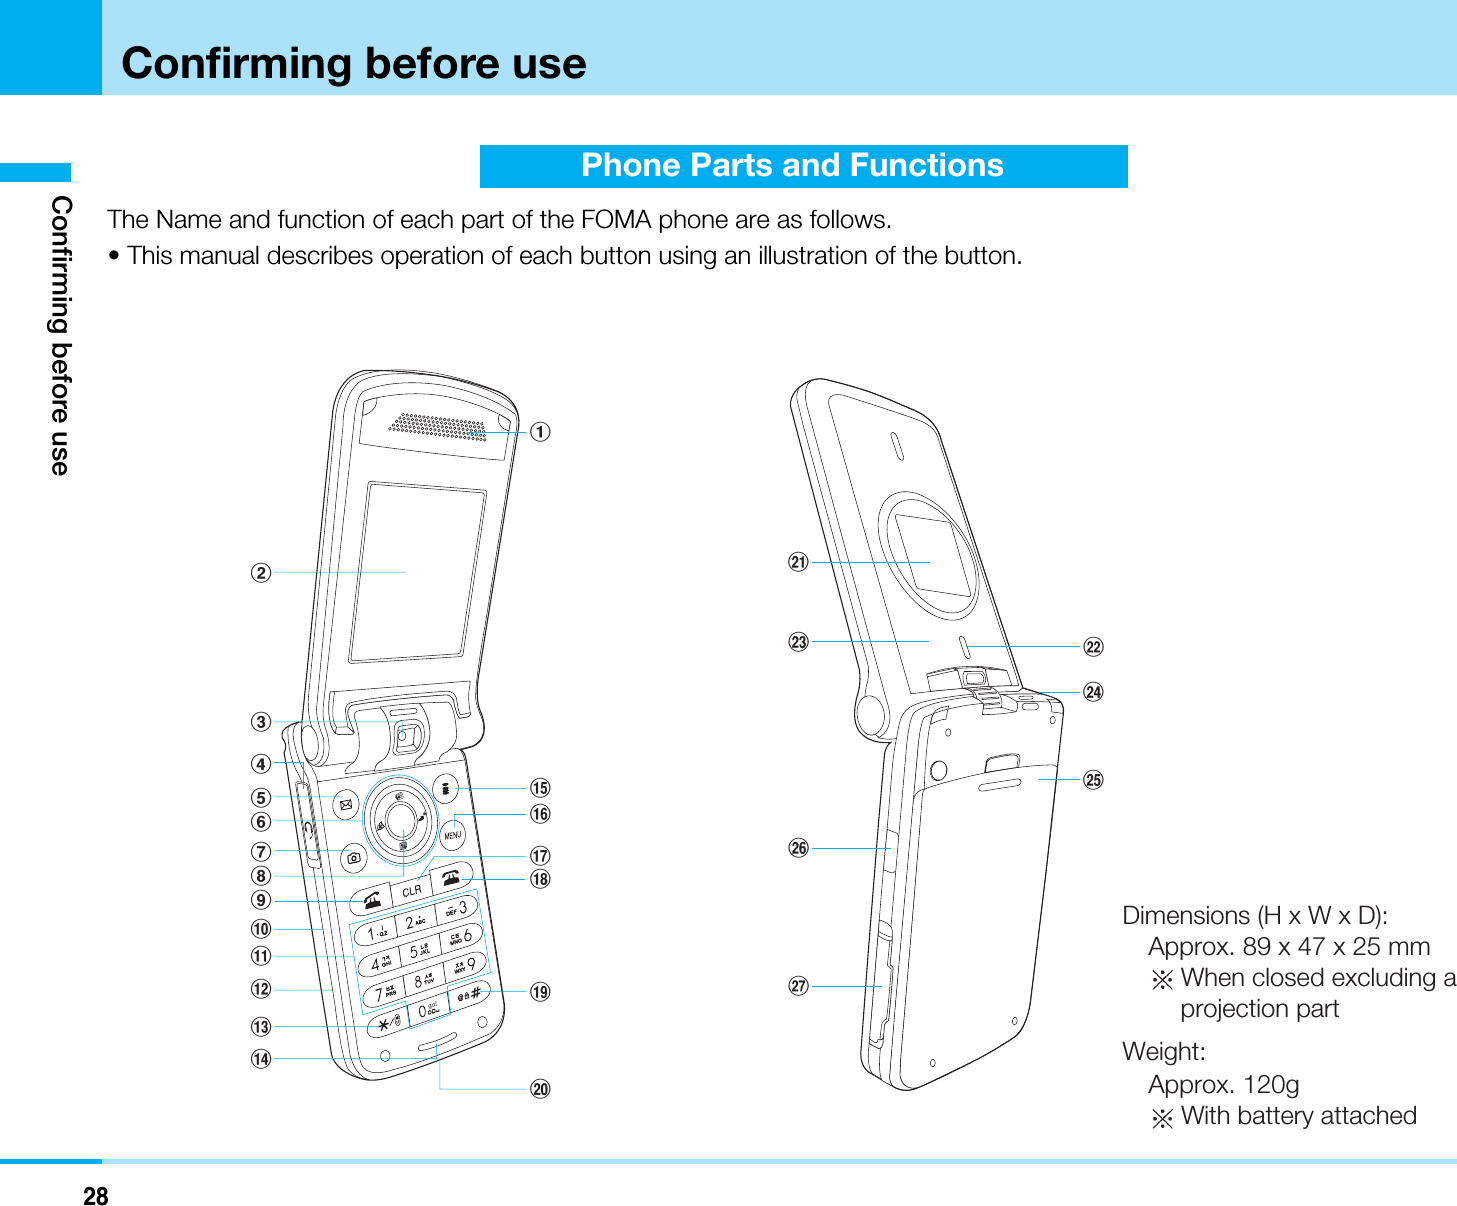 28Confirming before useÇ)égópëOÇÃämîFConfirming before usePhone Parts and FunctionsThe Name and function of each part of the FOMA phone are as follows.• This manual describes operation of each button using an illustration of the button.23546789!&quot;#$%,+~)&amp;1(-:;./&lt;=Dimensions (H x W x D): Approx. 89 x 47 x 25 mmWhen closed excluding aprojection partWeight:Approx. 120gWith battery attached